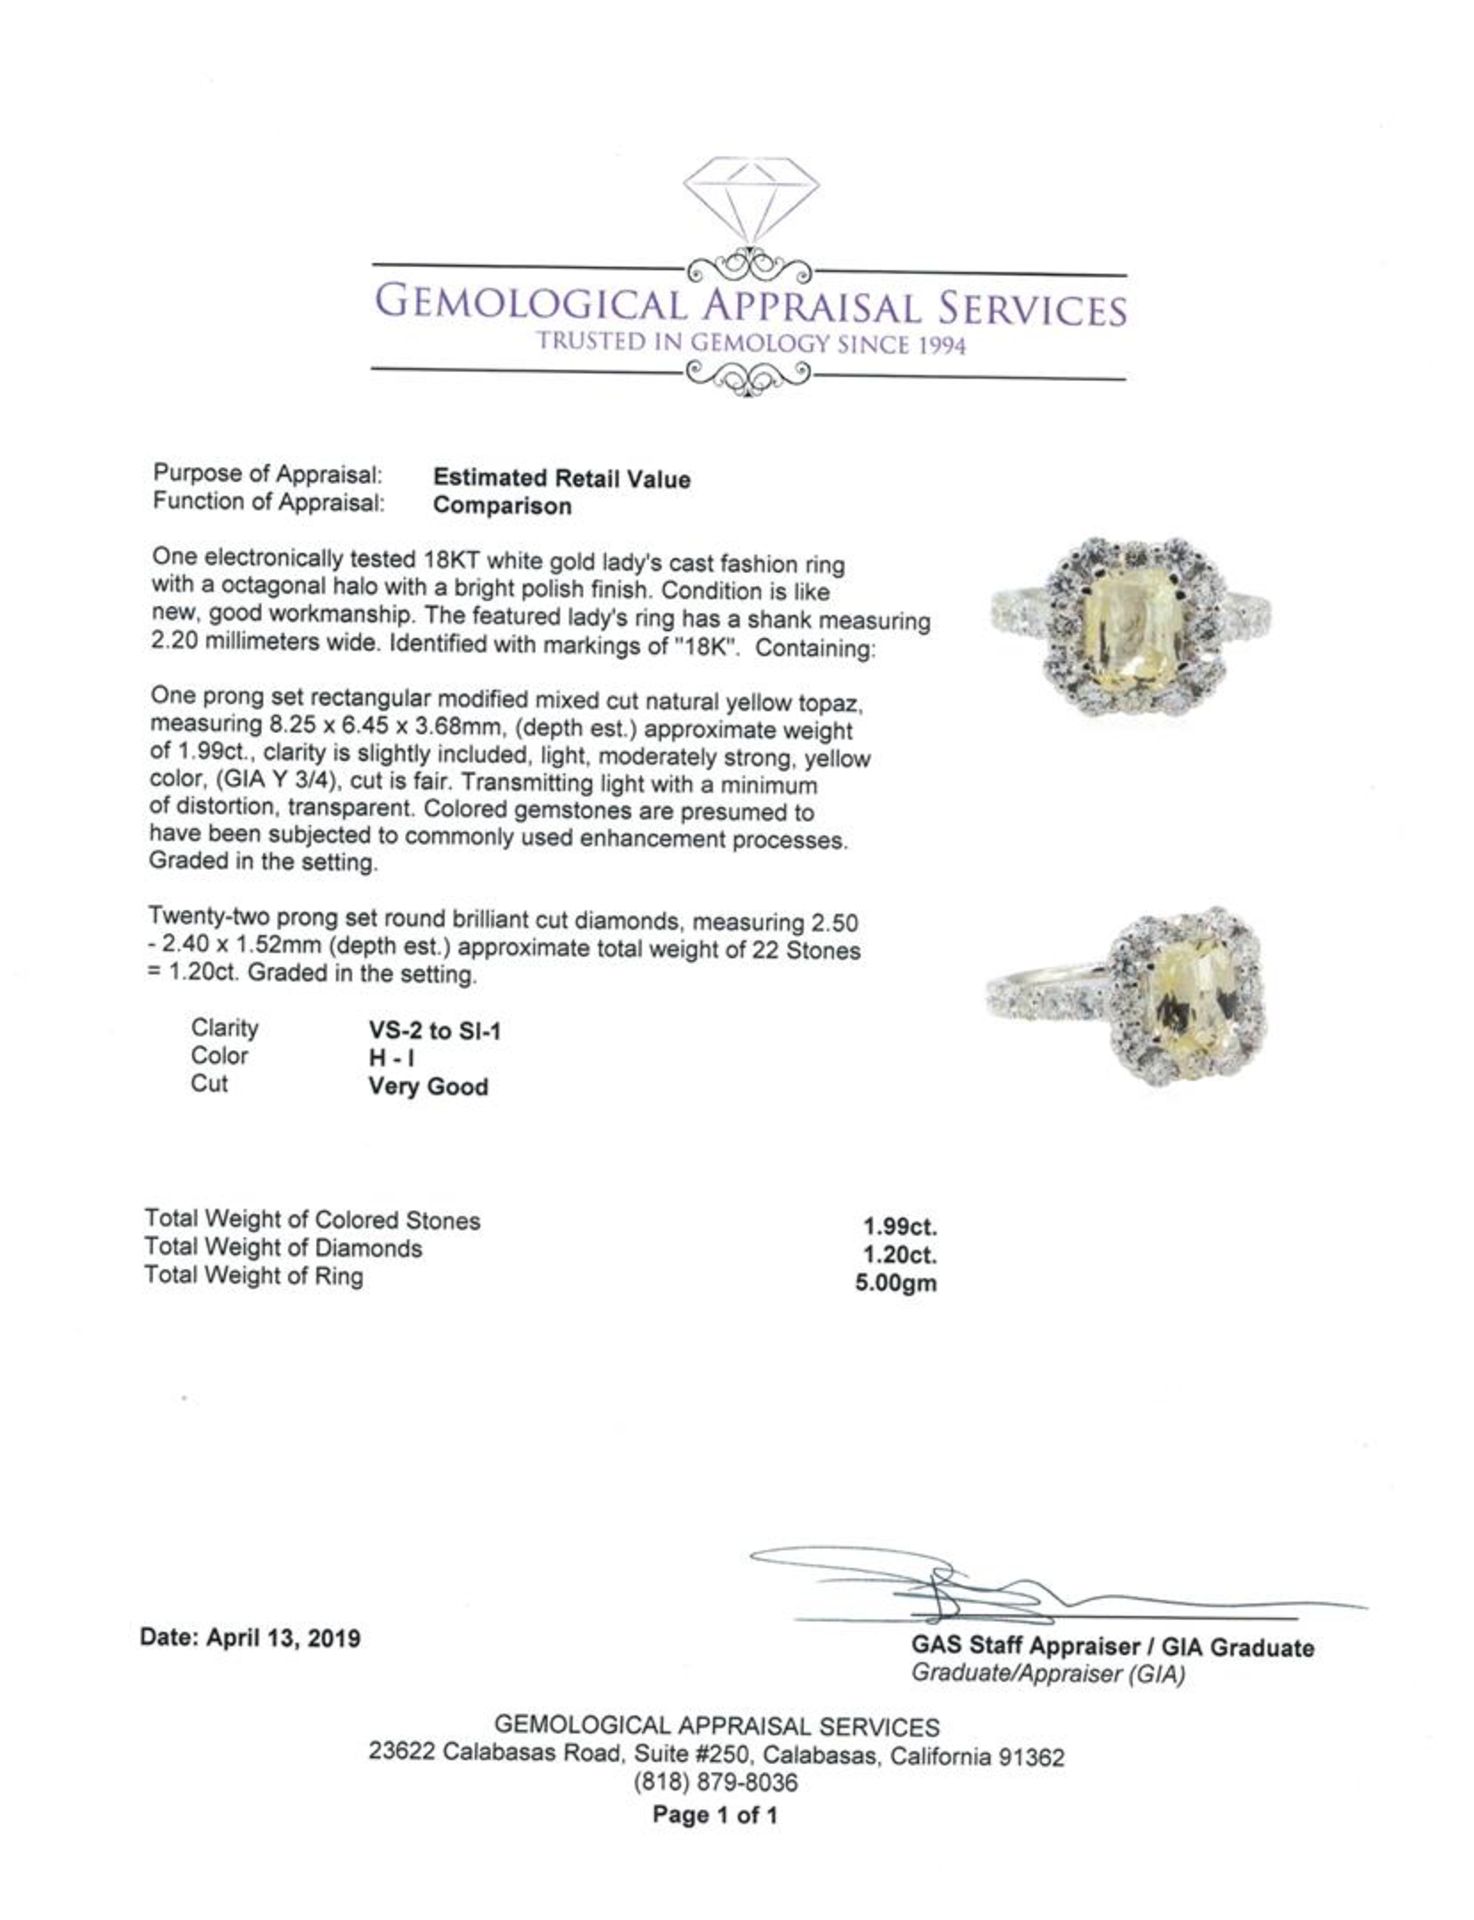 3.19 ctw Yellow Topaz And Diamond Ring - 18KT White Gold - Image 5 of 5